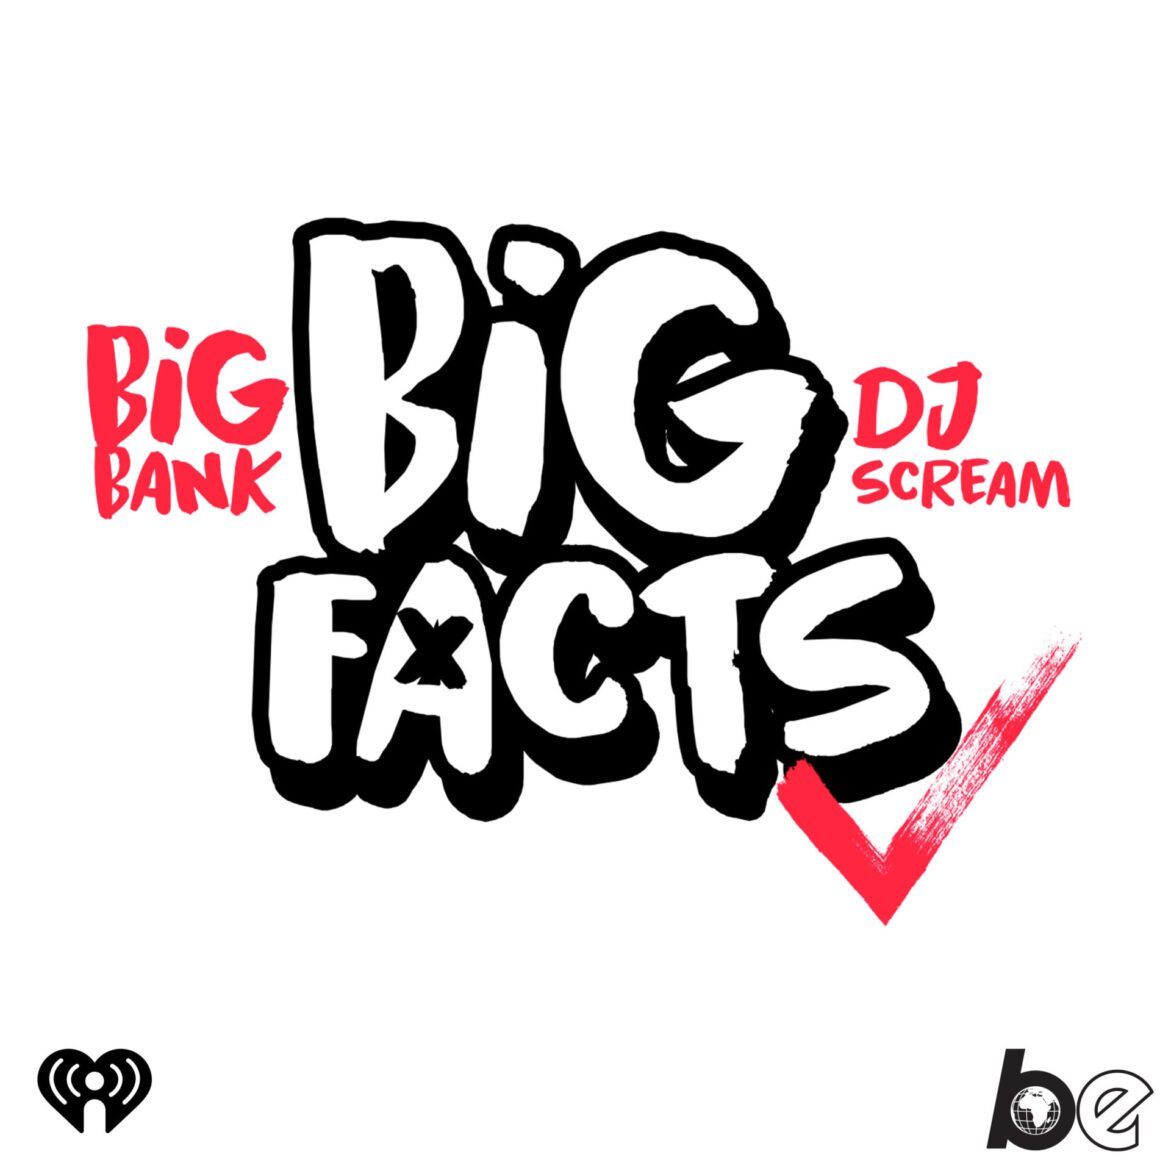 Black Podcasting - BIG FACTS feat. BOOSIE